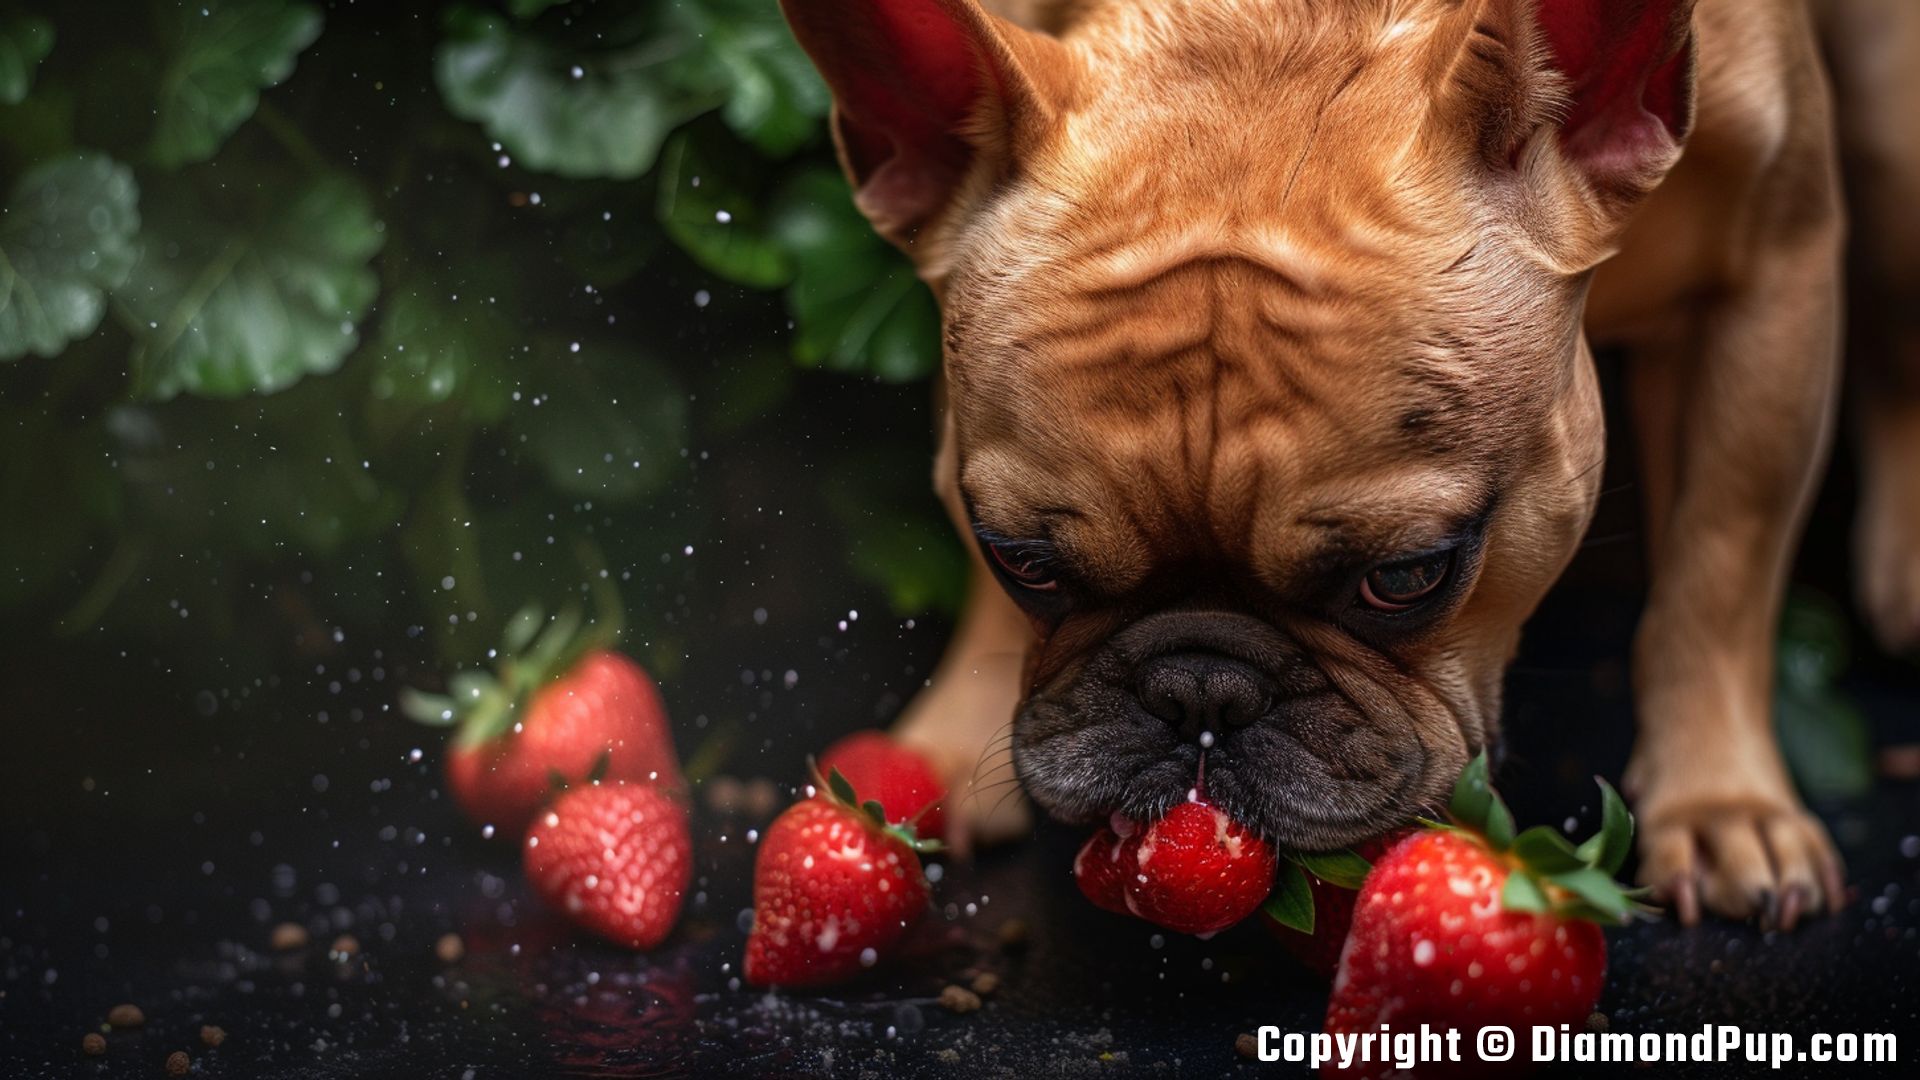 Photograph of a Happy French Bulldog Eating Strawberries